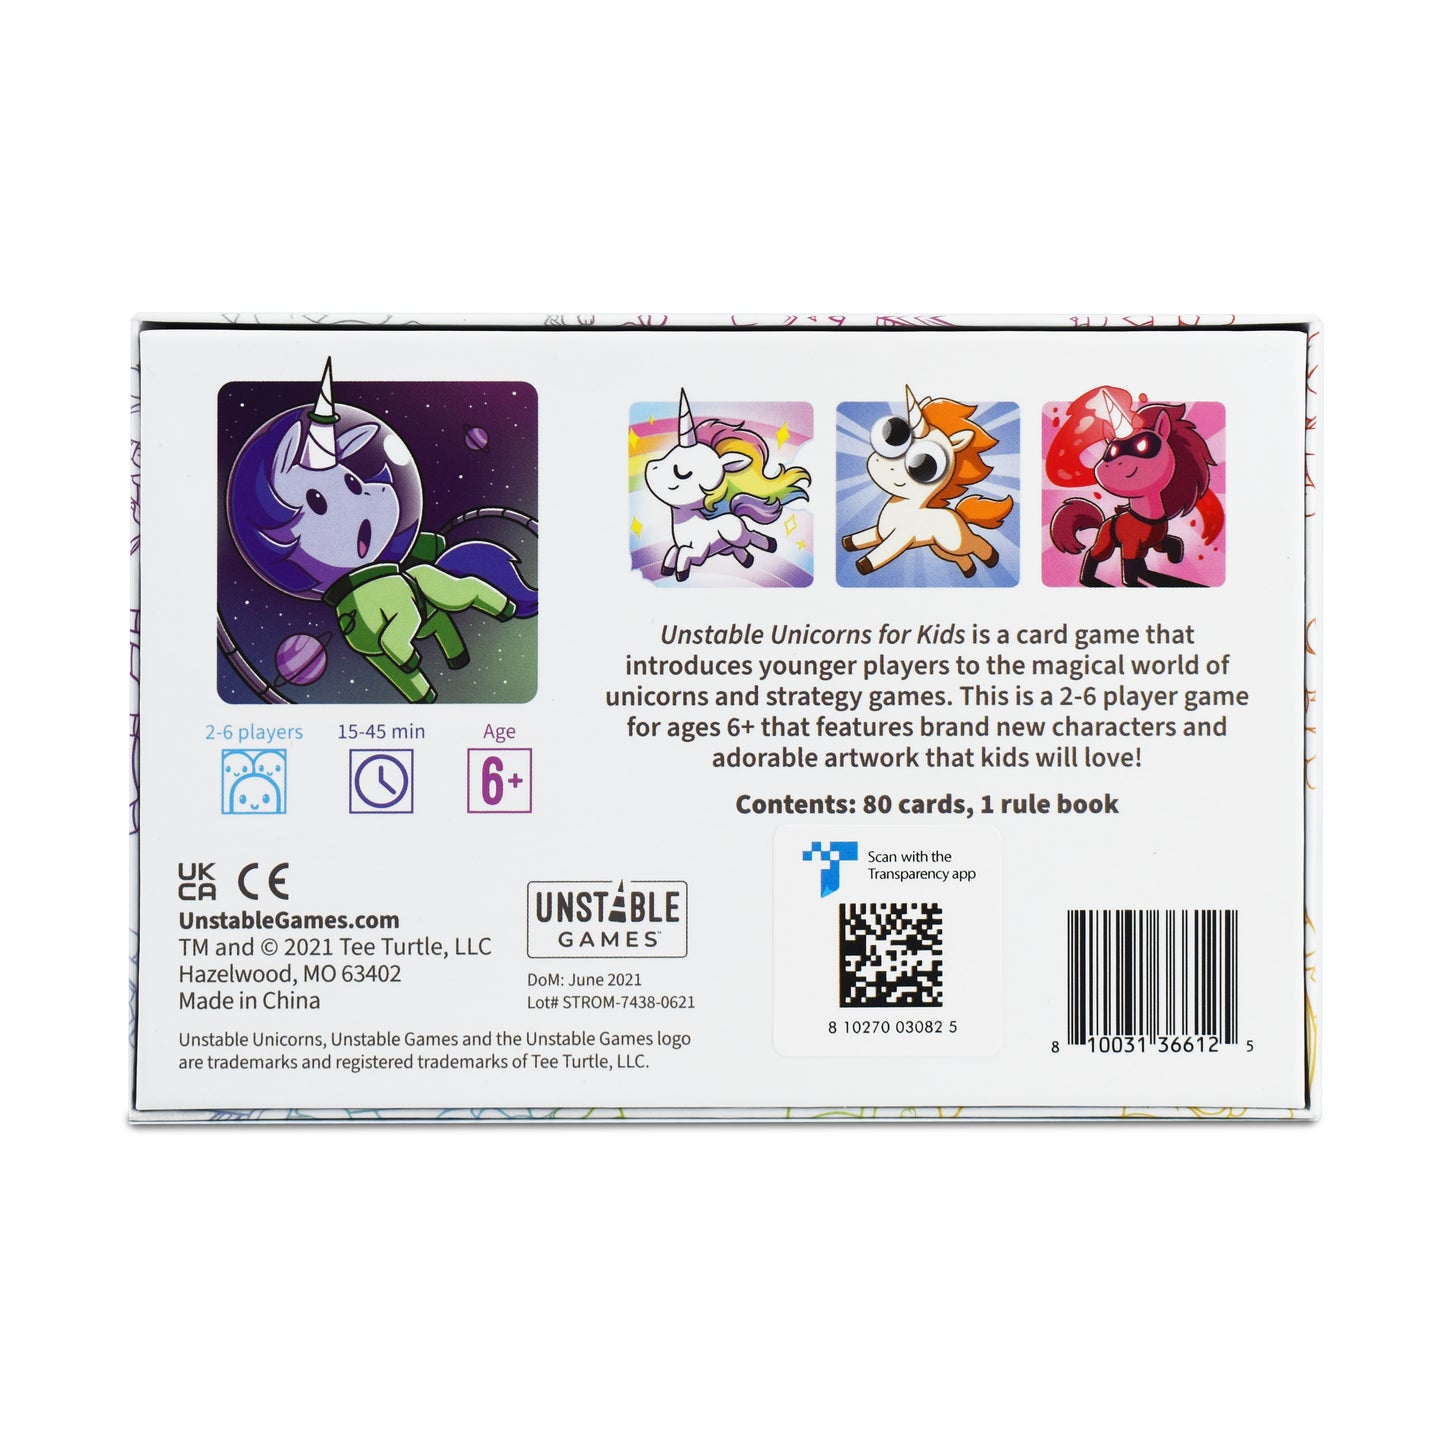 Back of a "Unstable Unicorns for Kids: Base Game" card game box featuring game details, illustrations of colorful unicorns, and pack contents listed.